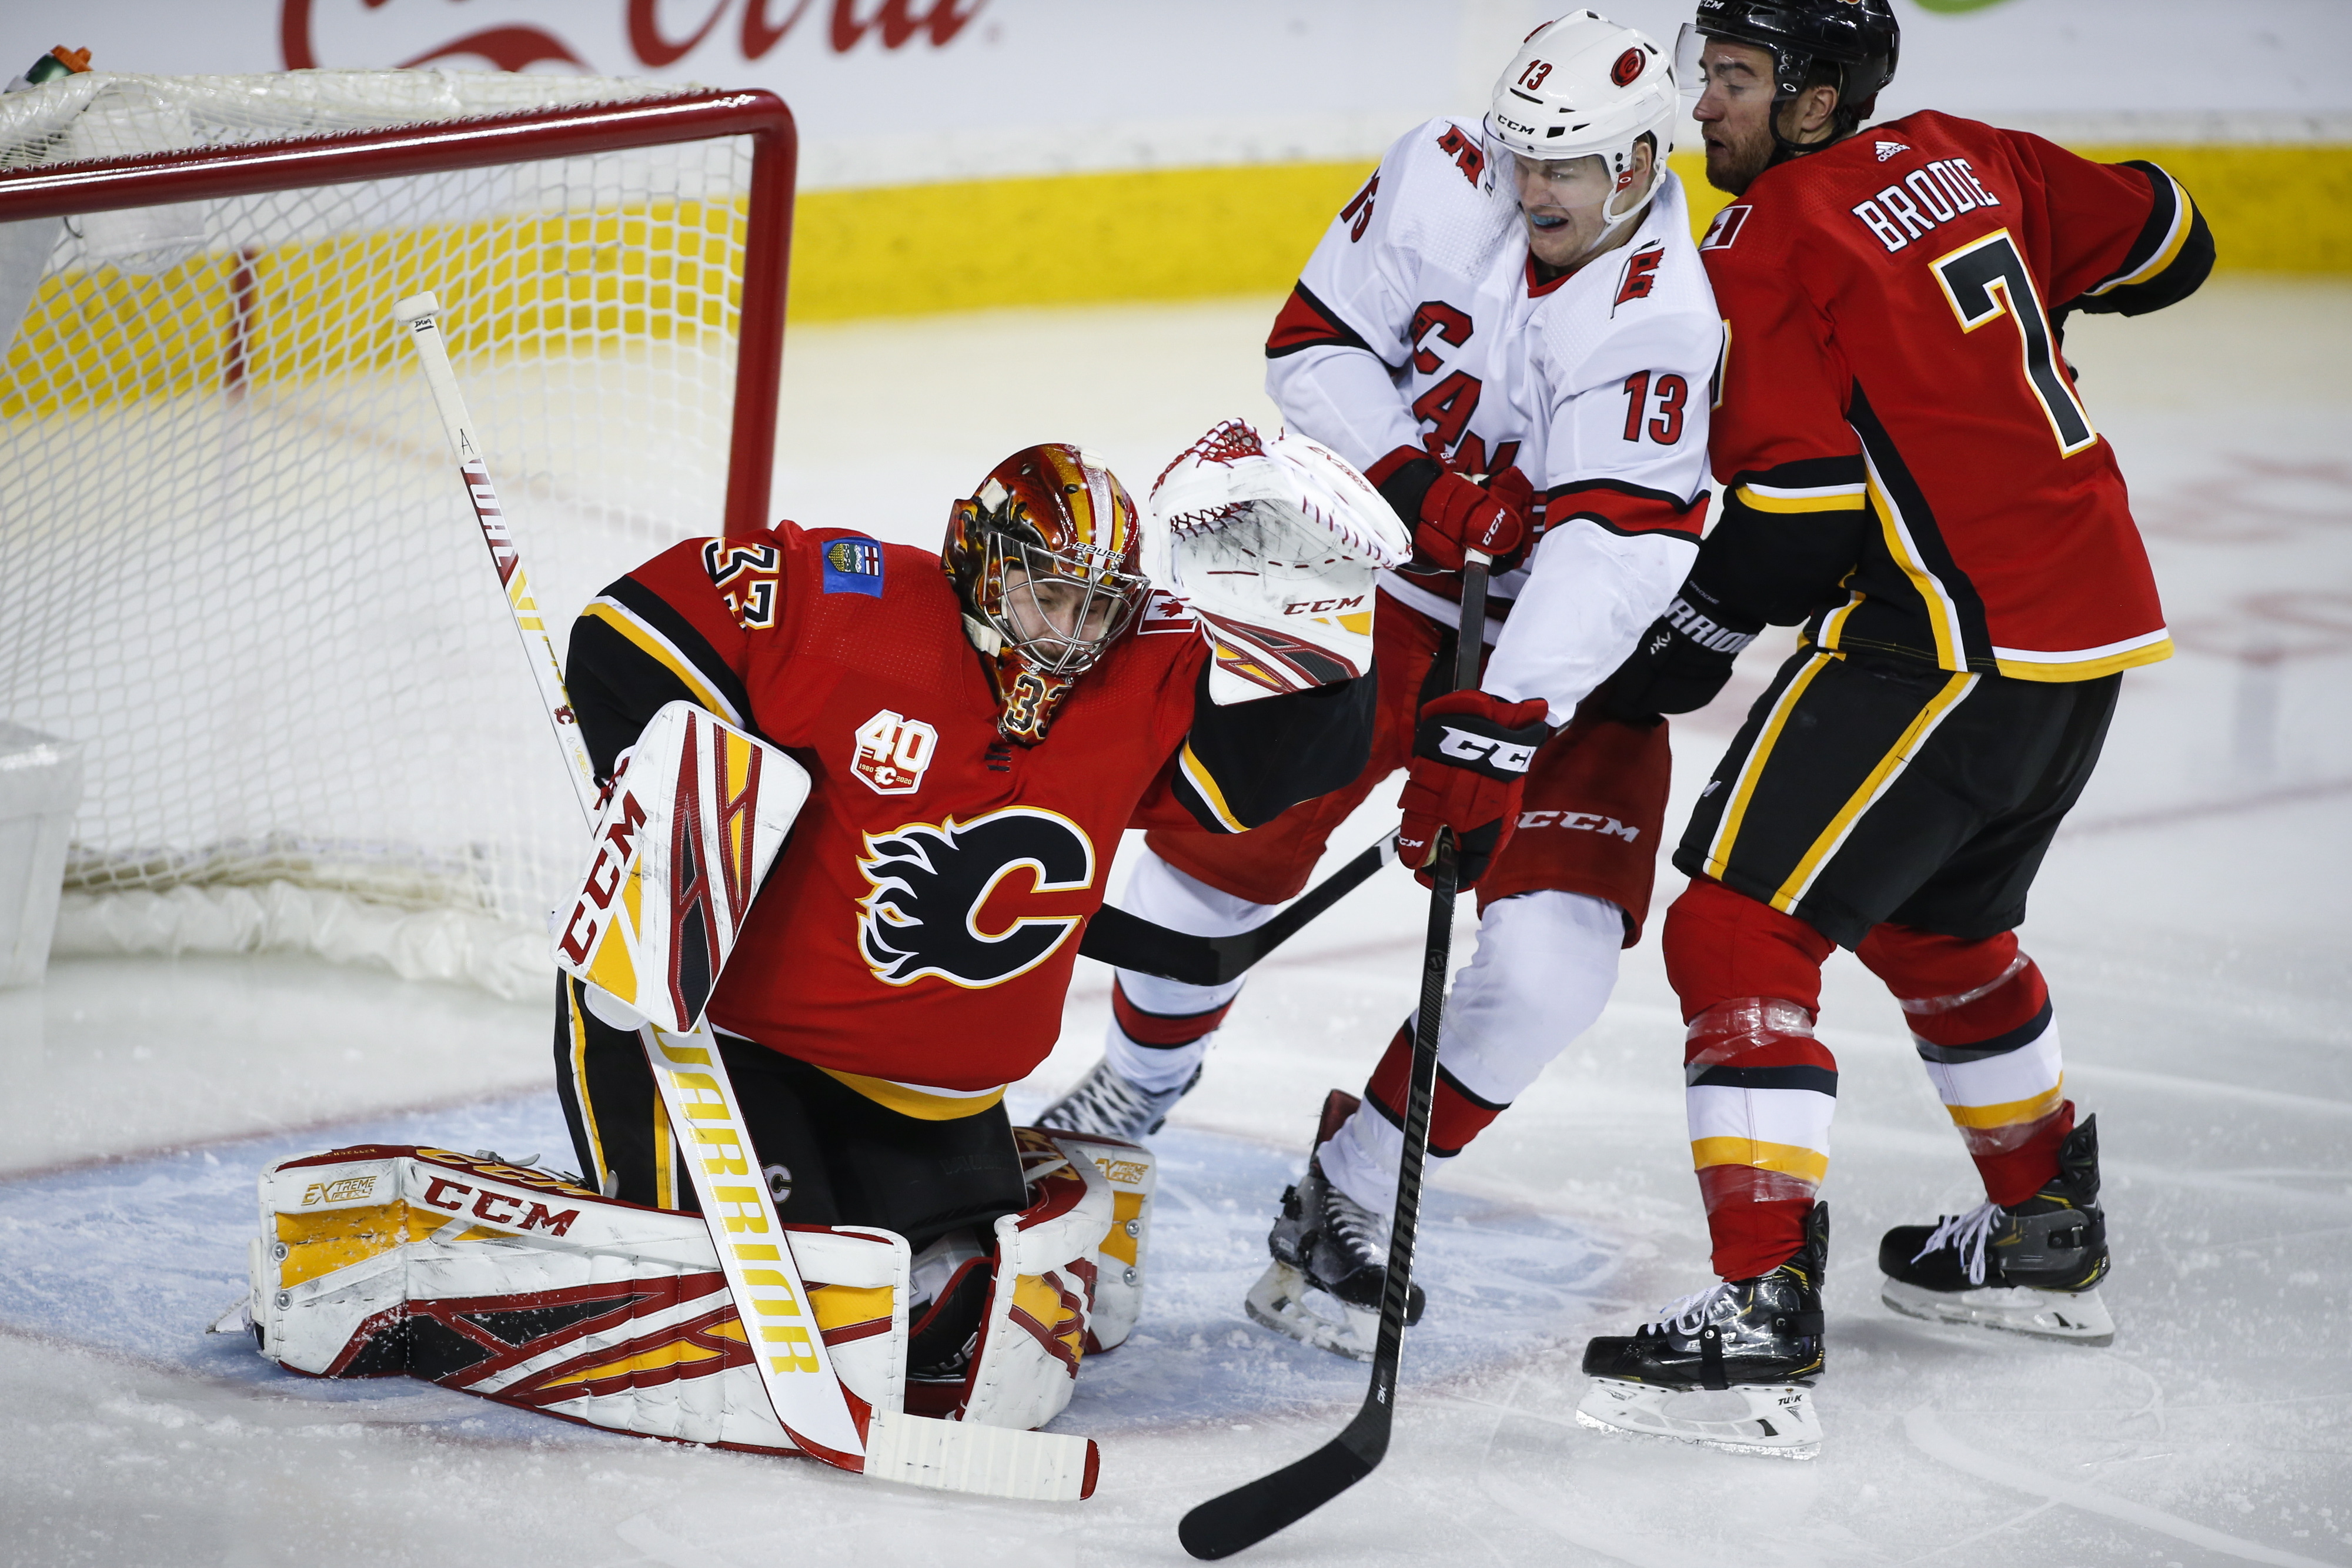 Canes end Flames' 7-game win streak; Isles top Sabres in OT